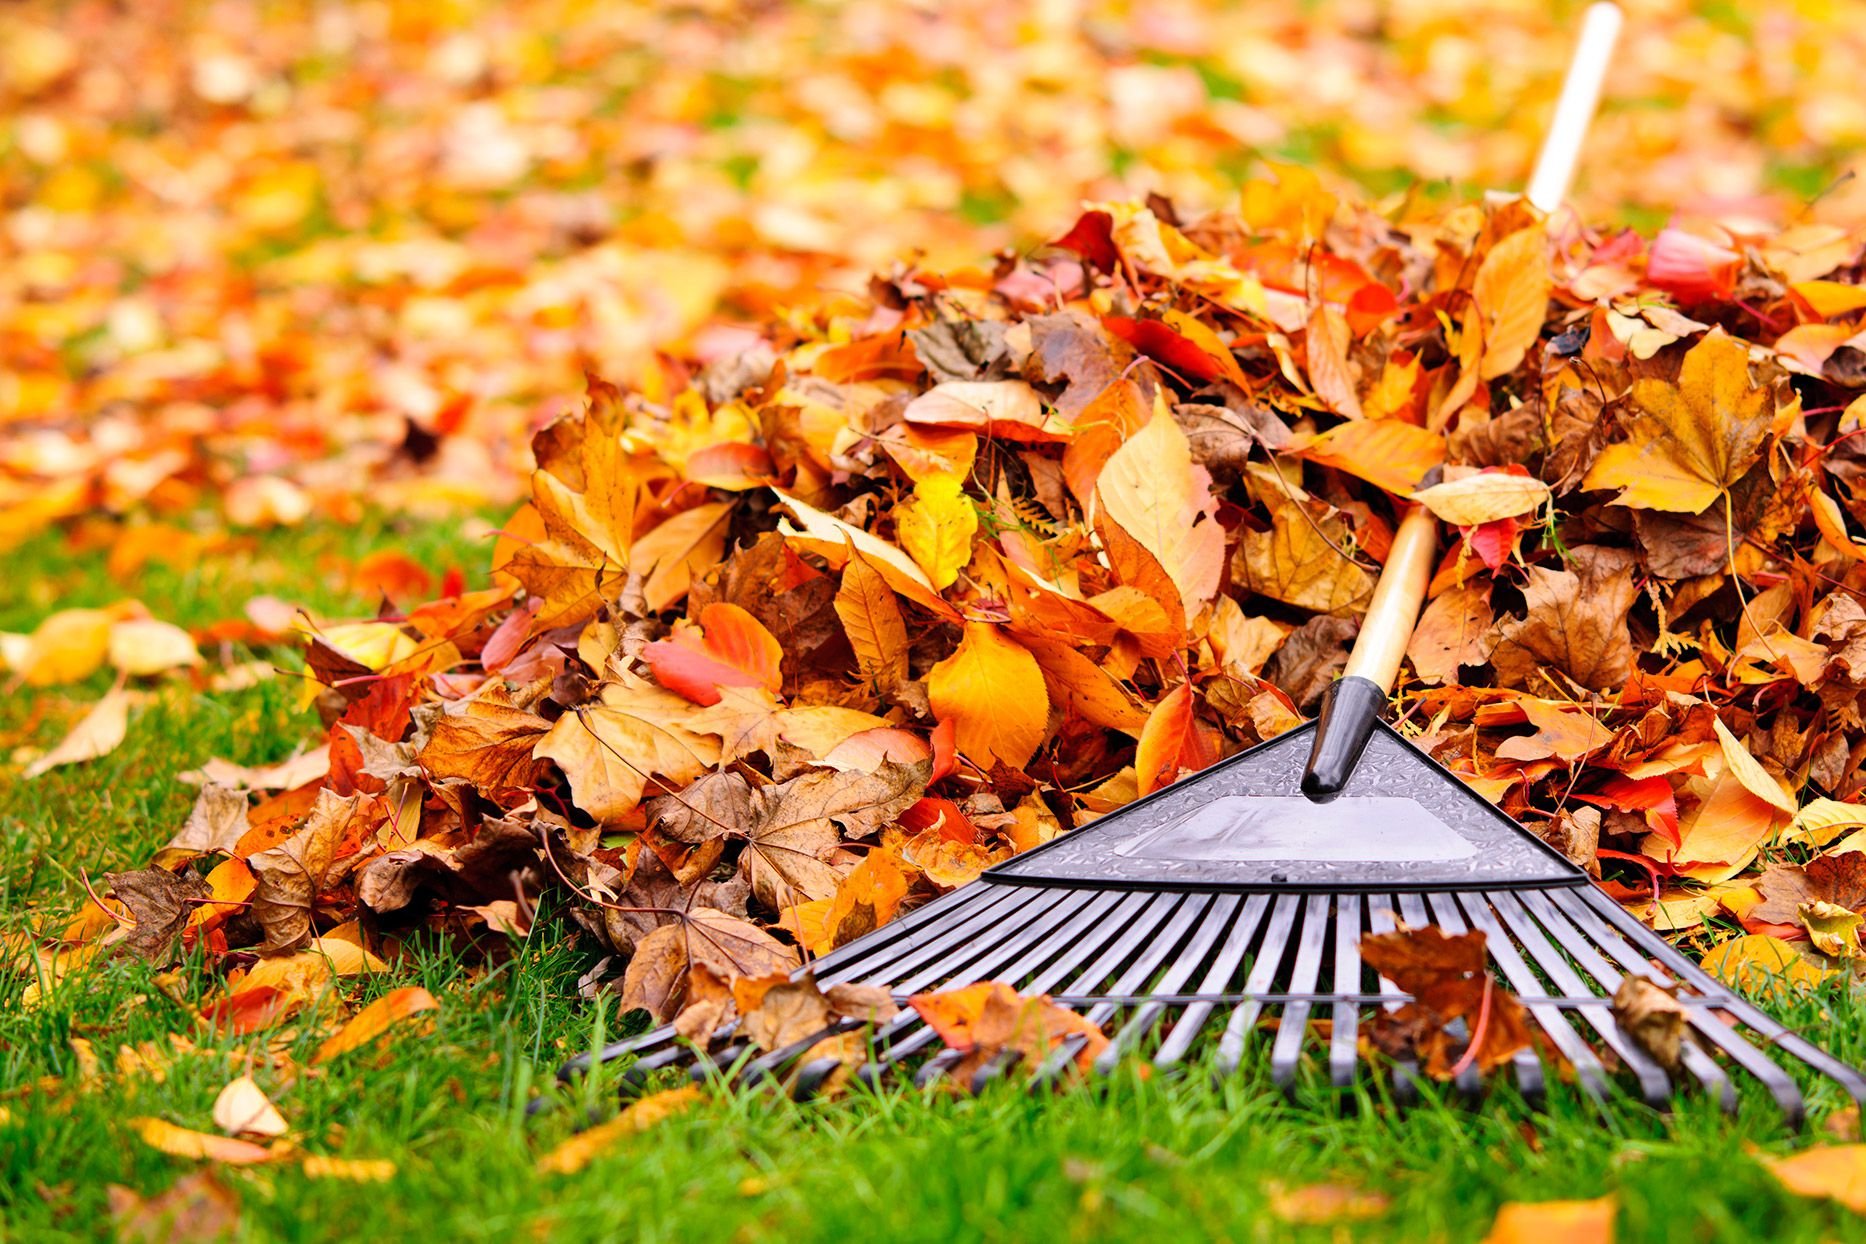 Follow This Fall Garden Checklist to Prep Your Yard for Winter